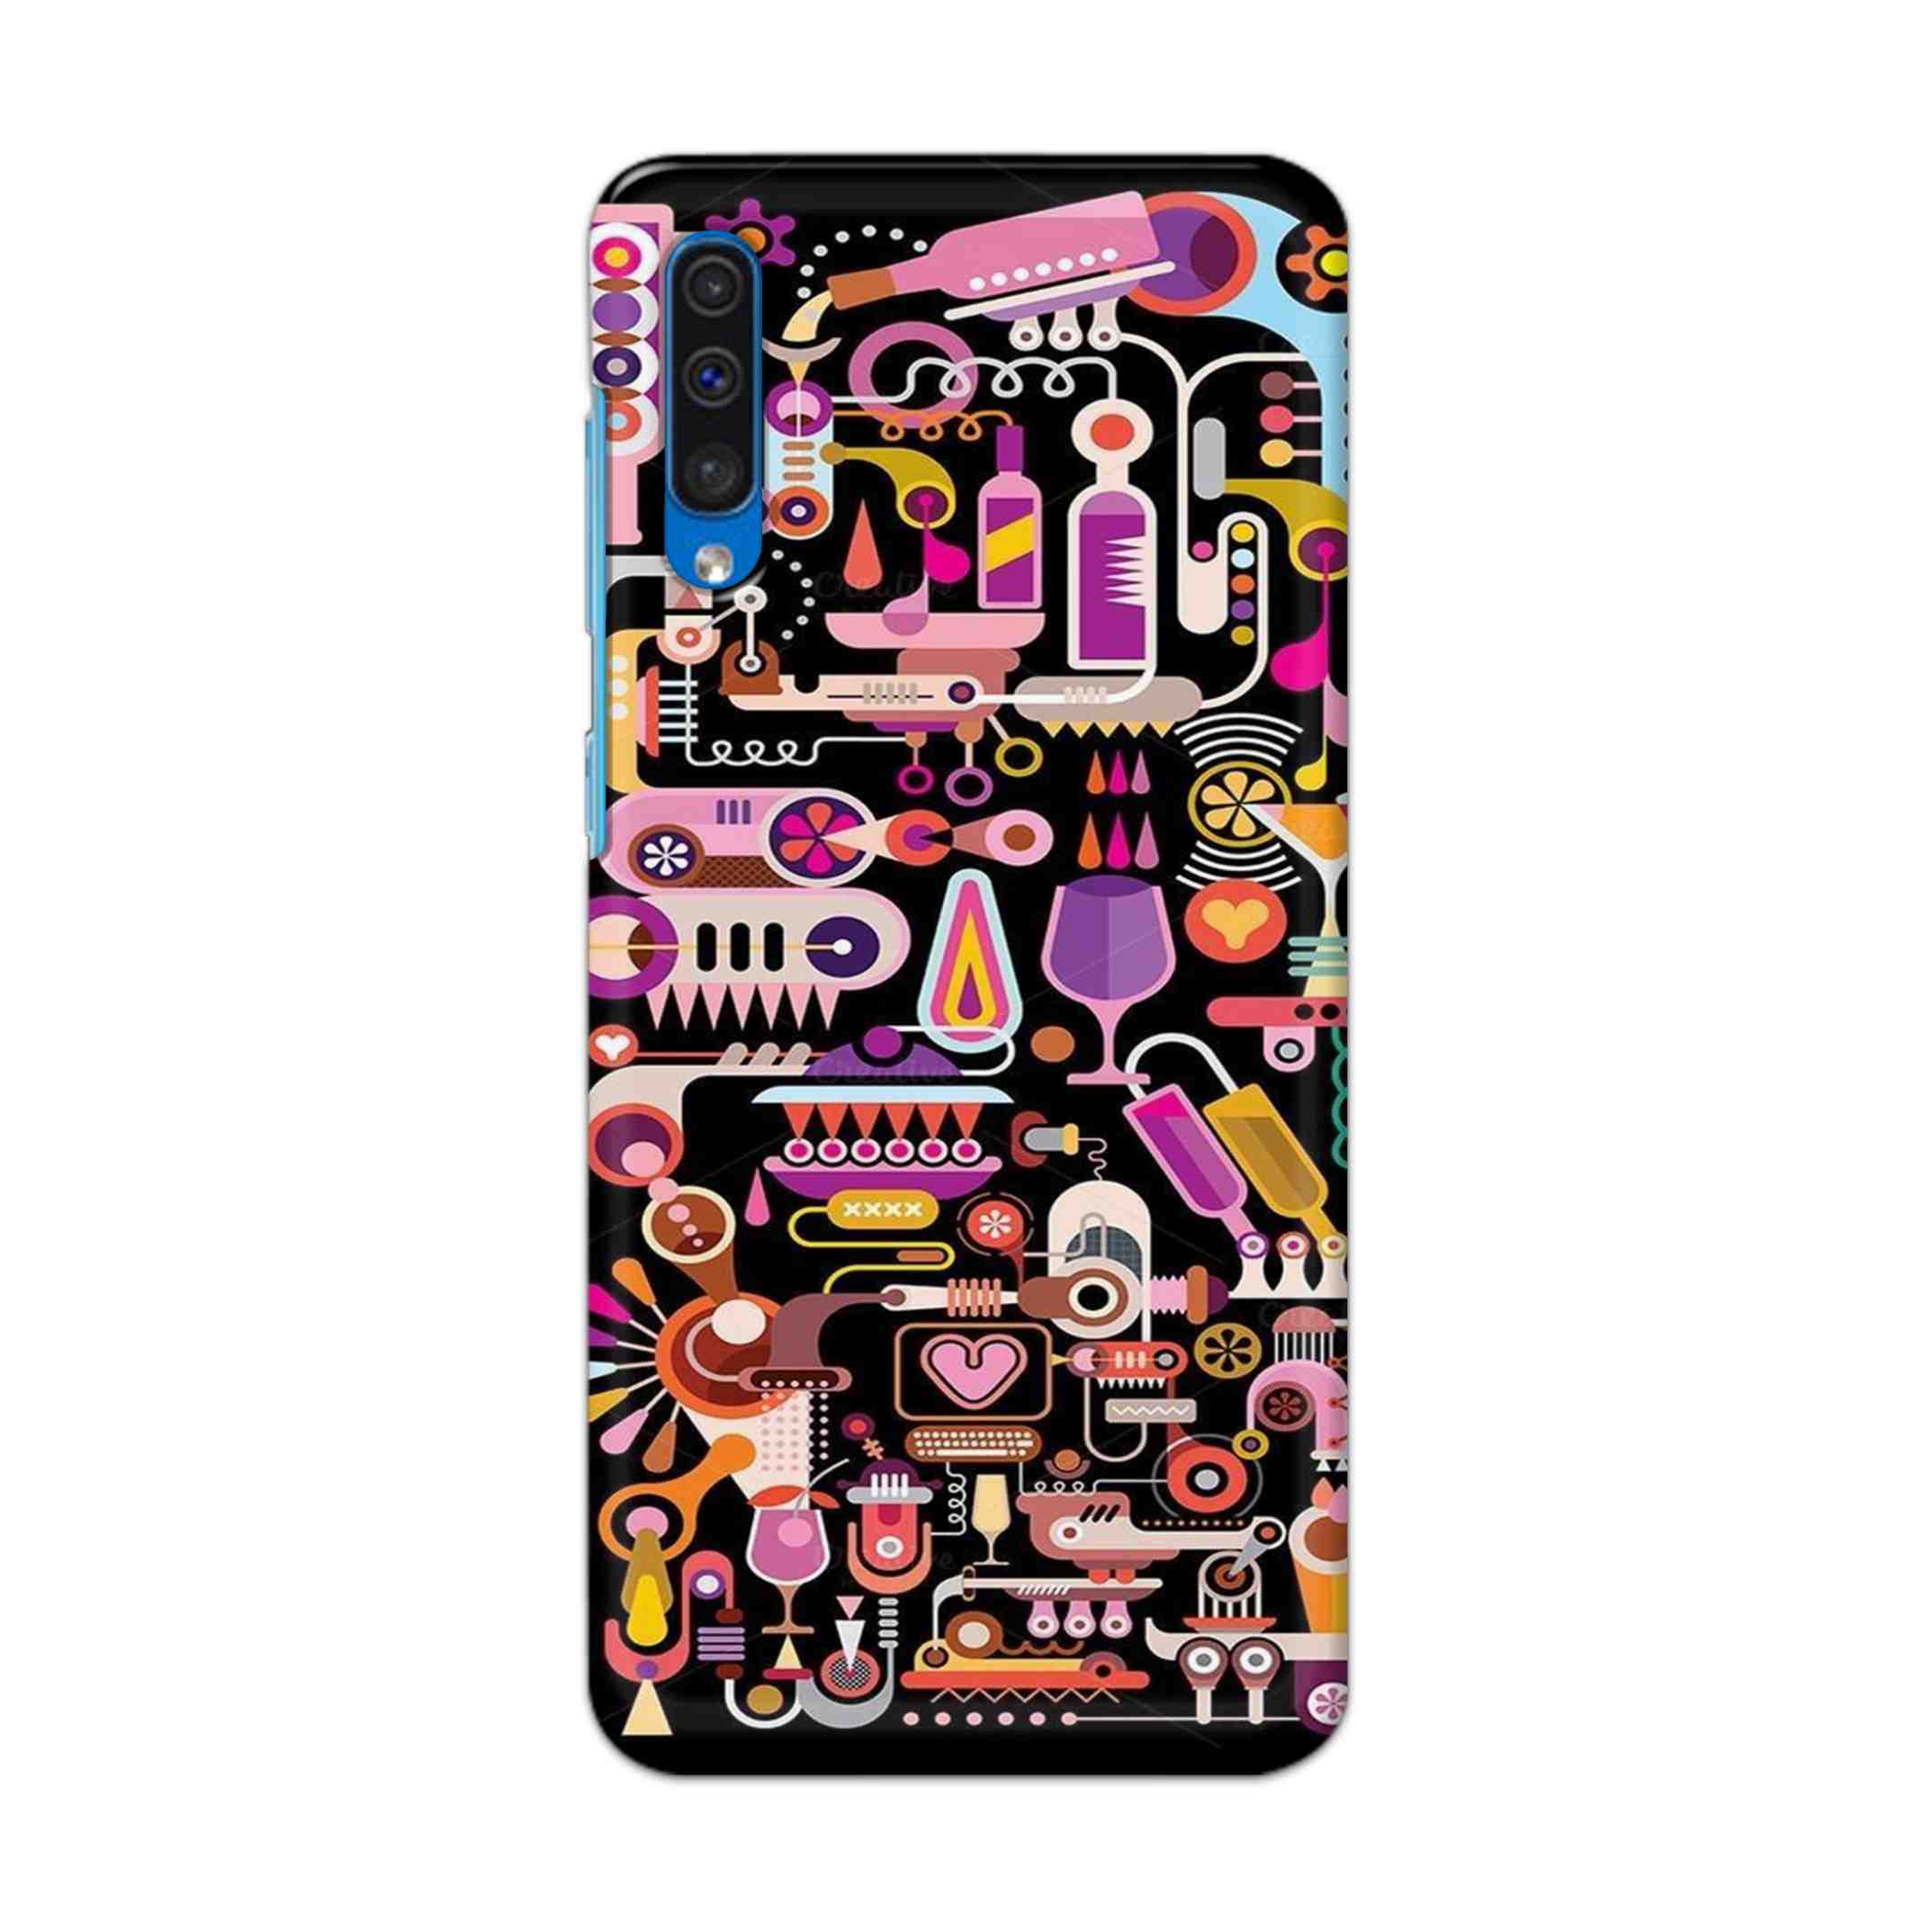 Buy Lab Art Hard Back Mobile Phone Case Cover For Samsung Galaxy A50 / A50s / A30s Online